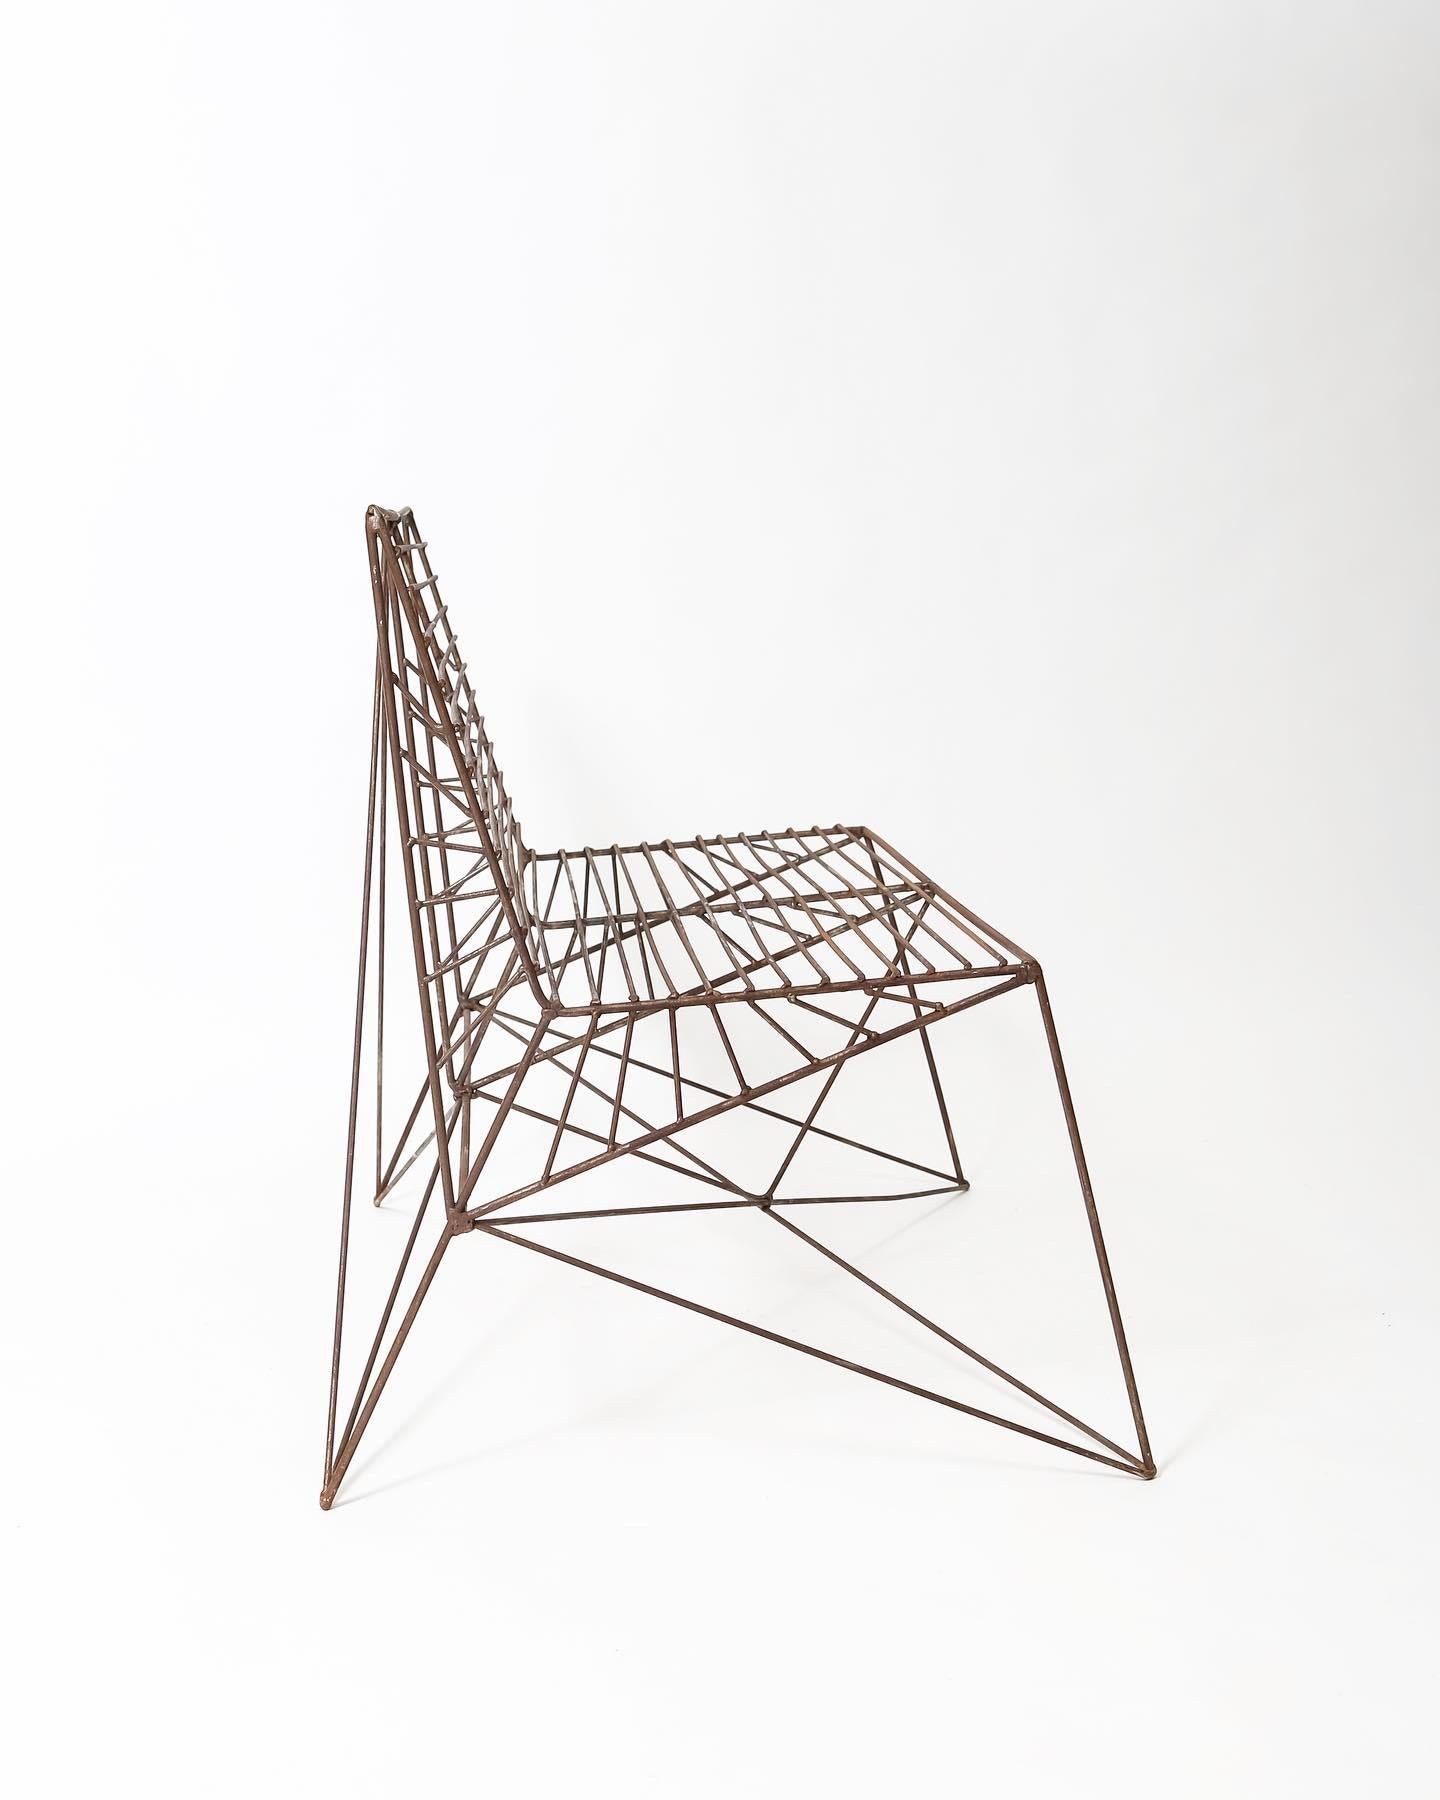 A compelling and sculptural seating option made from welded steel wire rod. As acquired, with rust in spots and nice overall patina. Very structurally sound, even comfortable. Geometric quality, reminiscent of Verner Panton but most likely